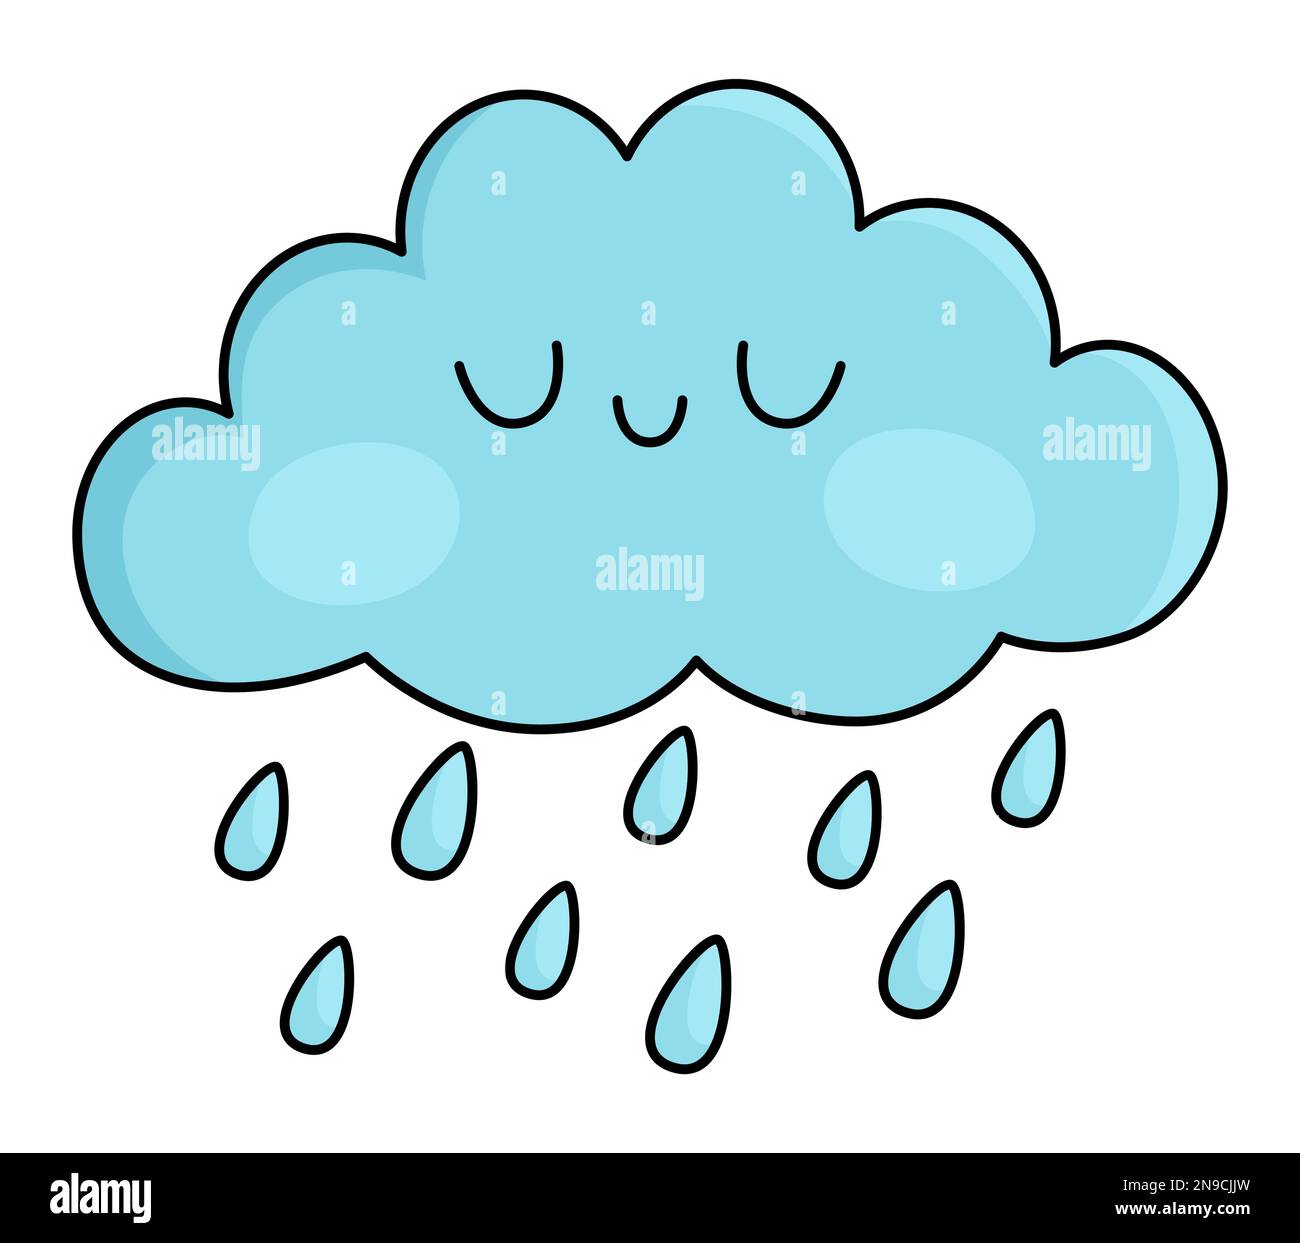 Vector kawaii cloud icon for kids. Cute weather element symbol illustration. Funny smiling cartoon character. Adorable storm clipart with rain drops Stock Vector